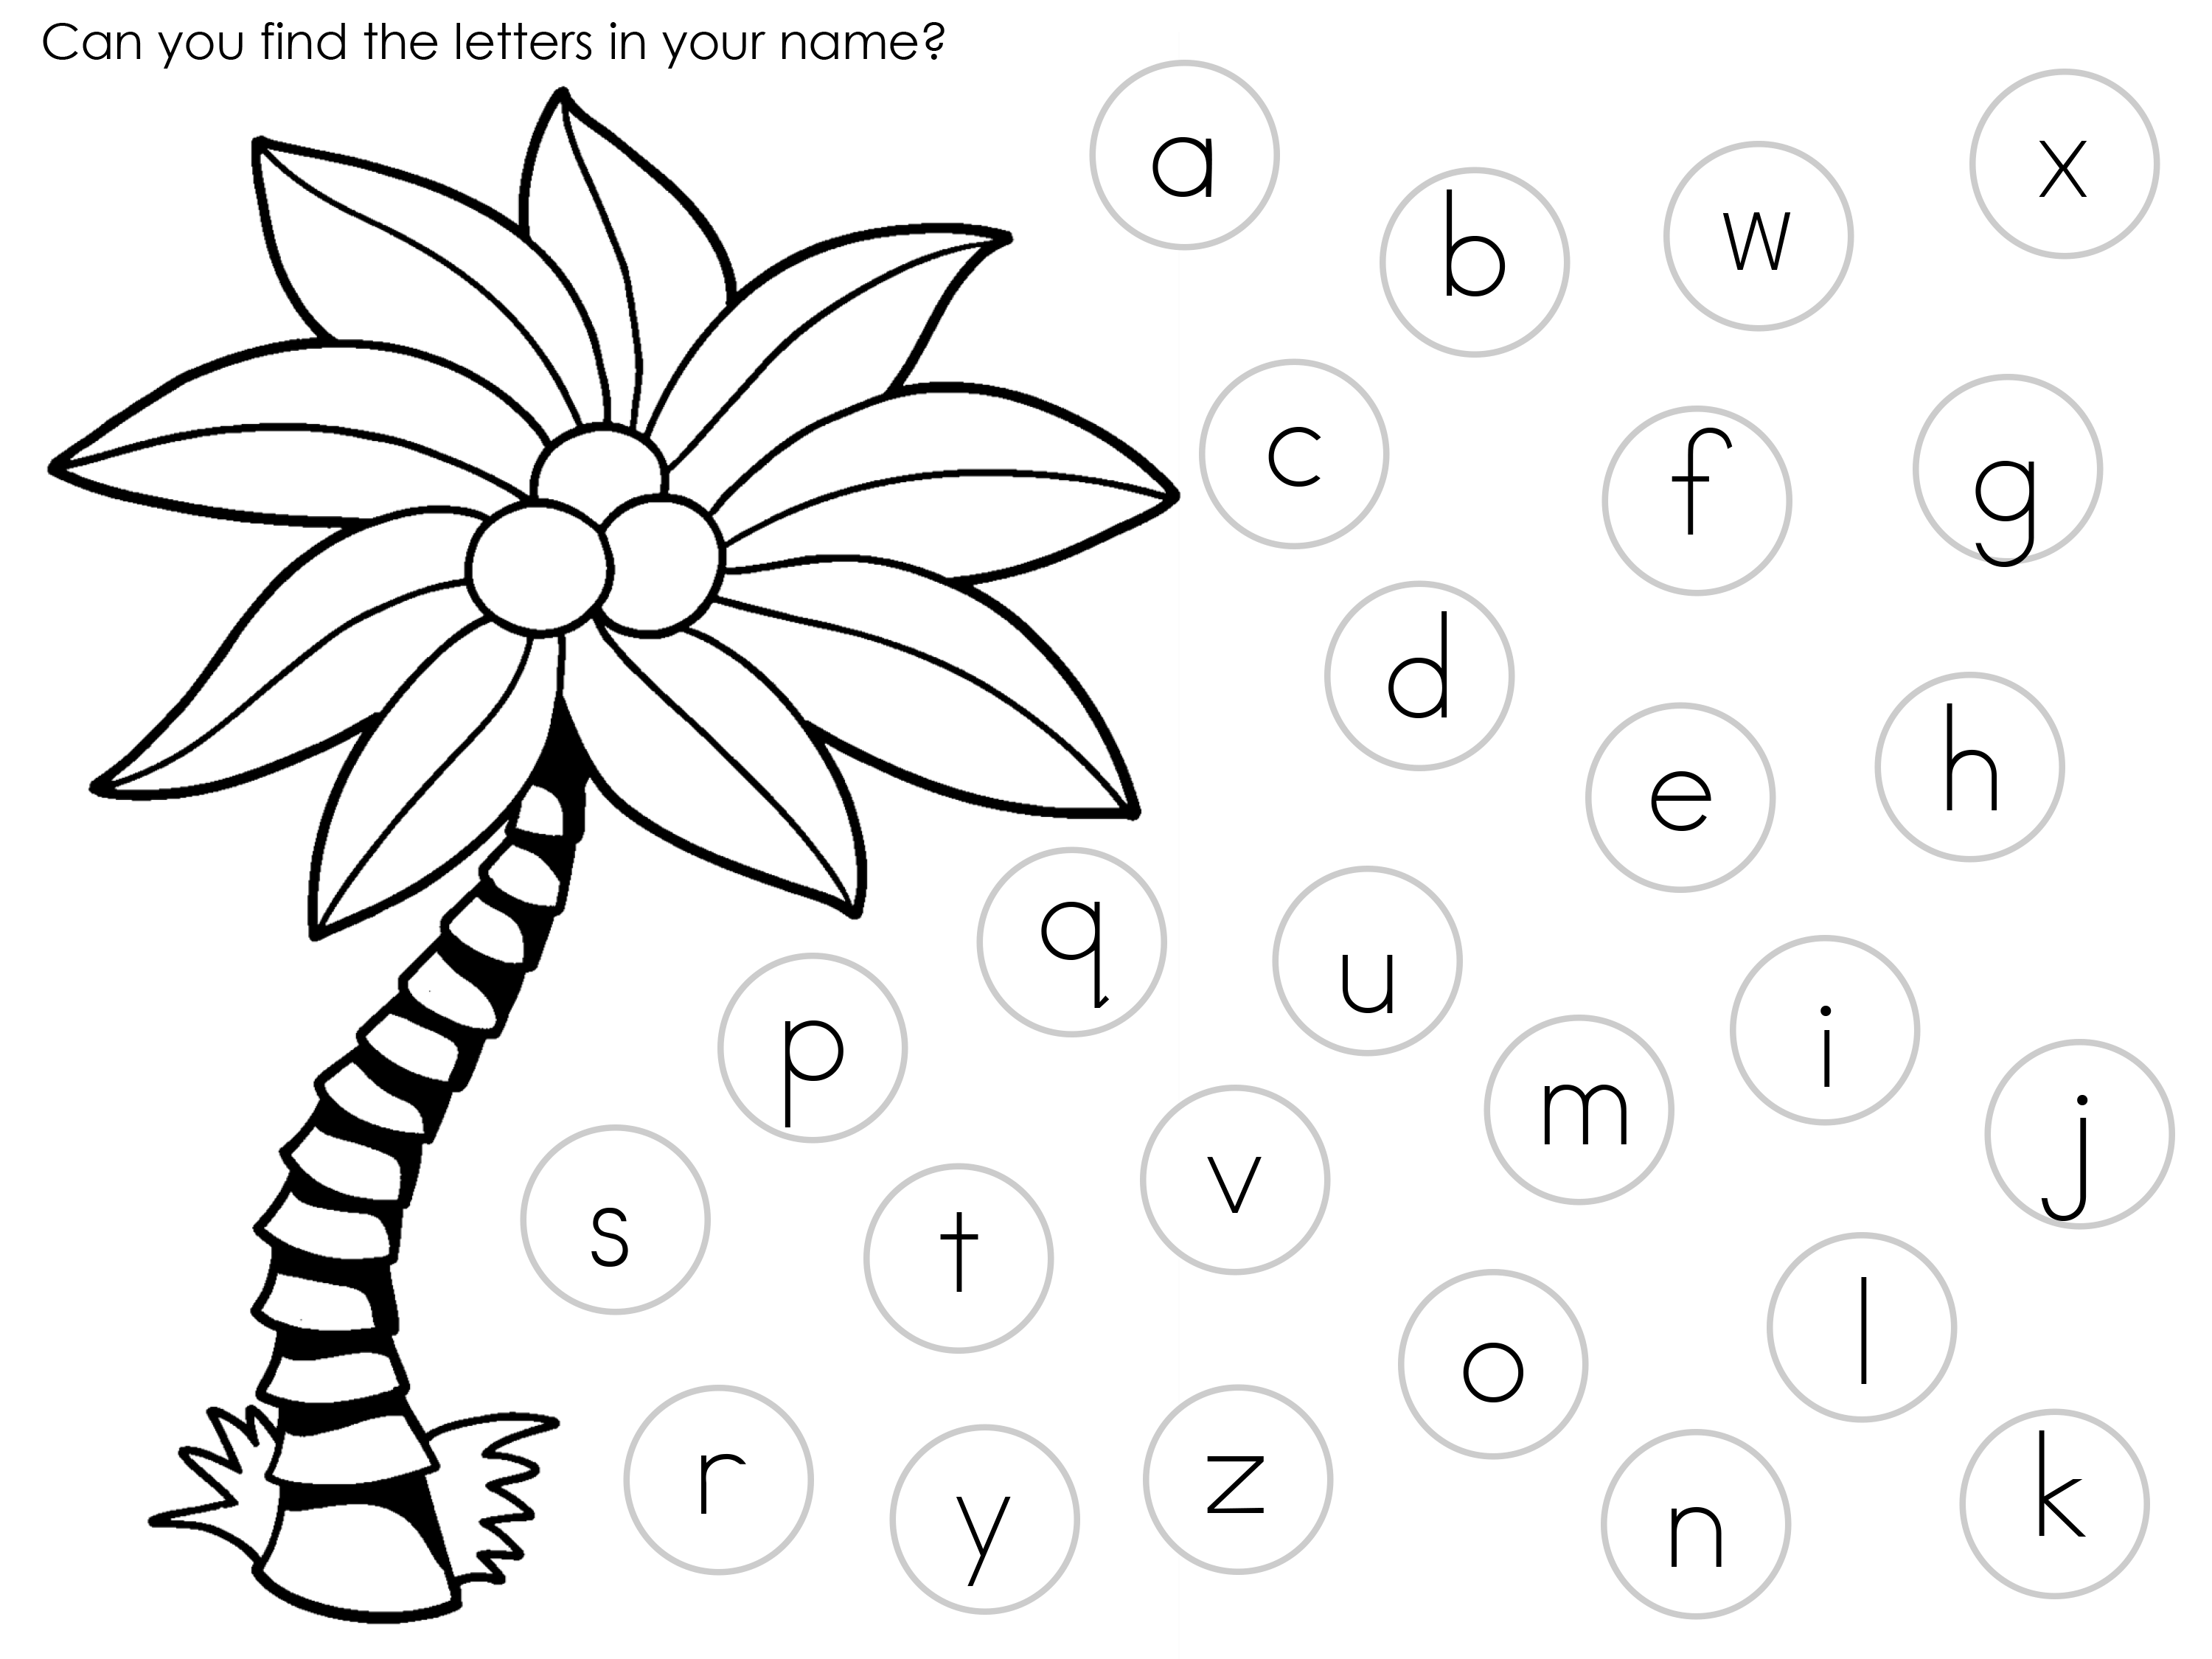 free-chicka-chicka-boom-boom-coloring-pages-download-free-chicka